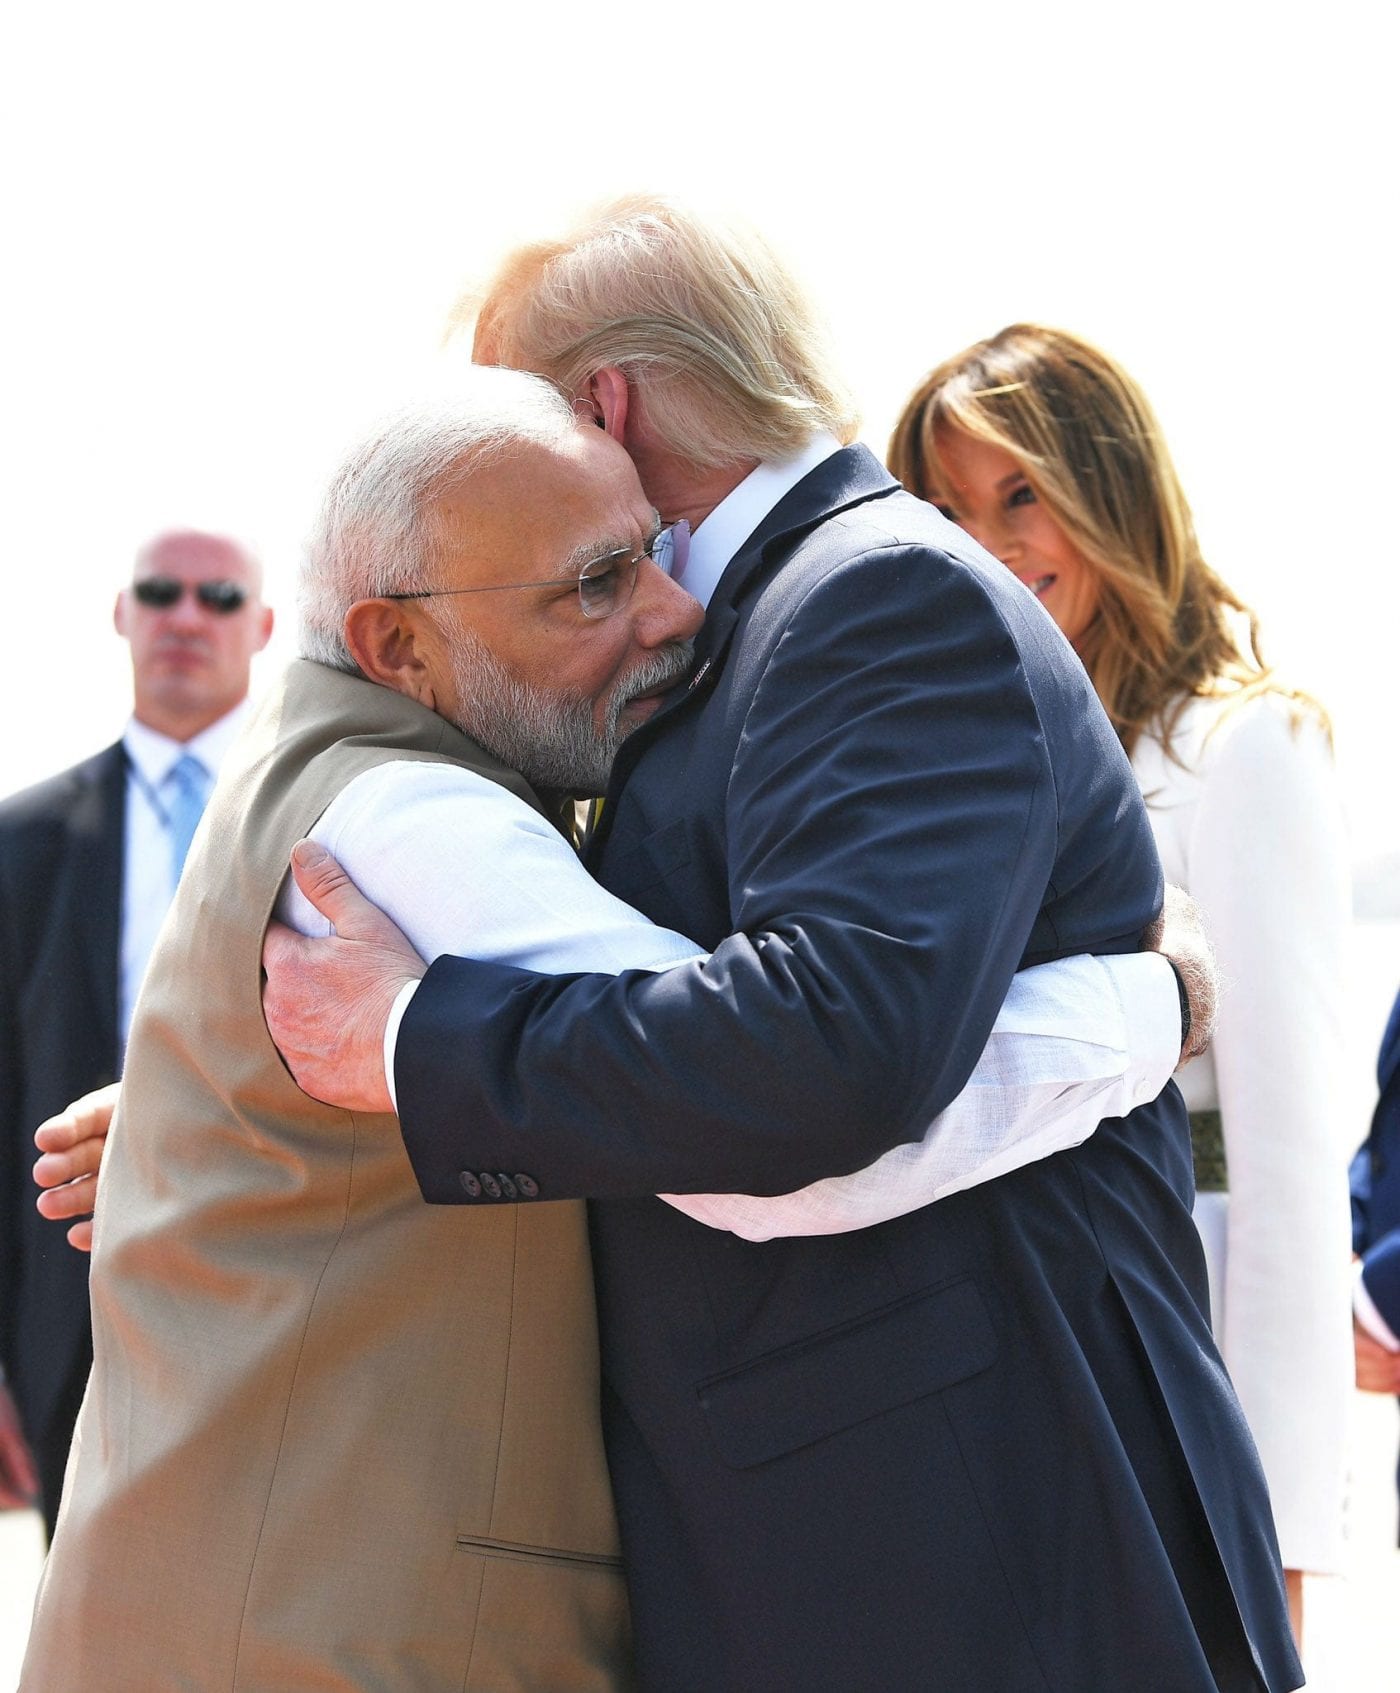 Namaste Trump: The bromance between two world leaders.